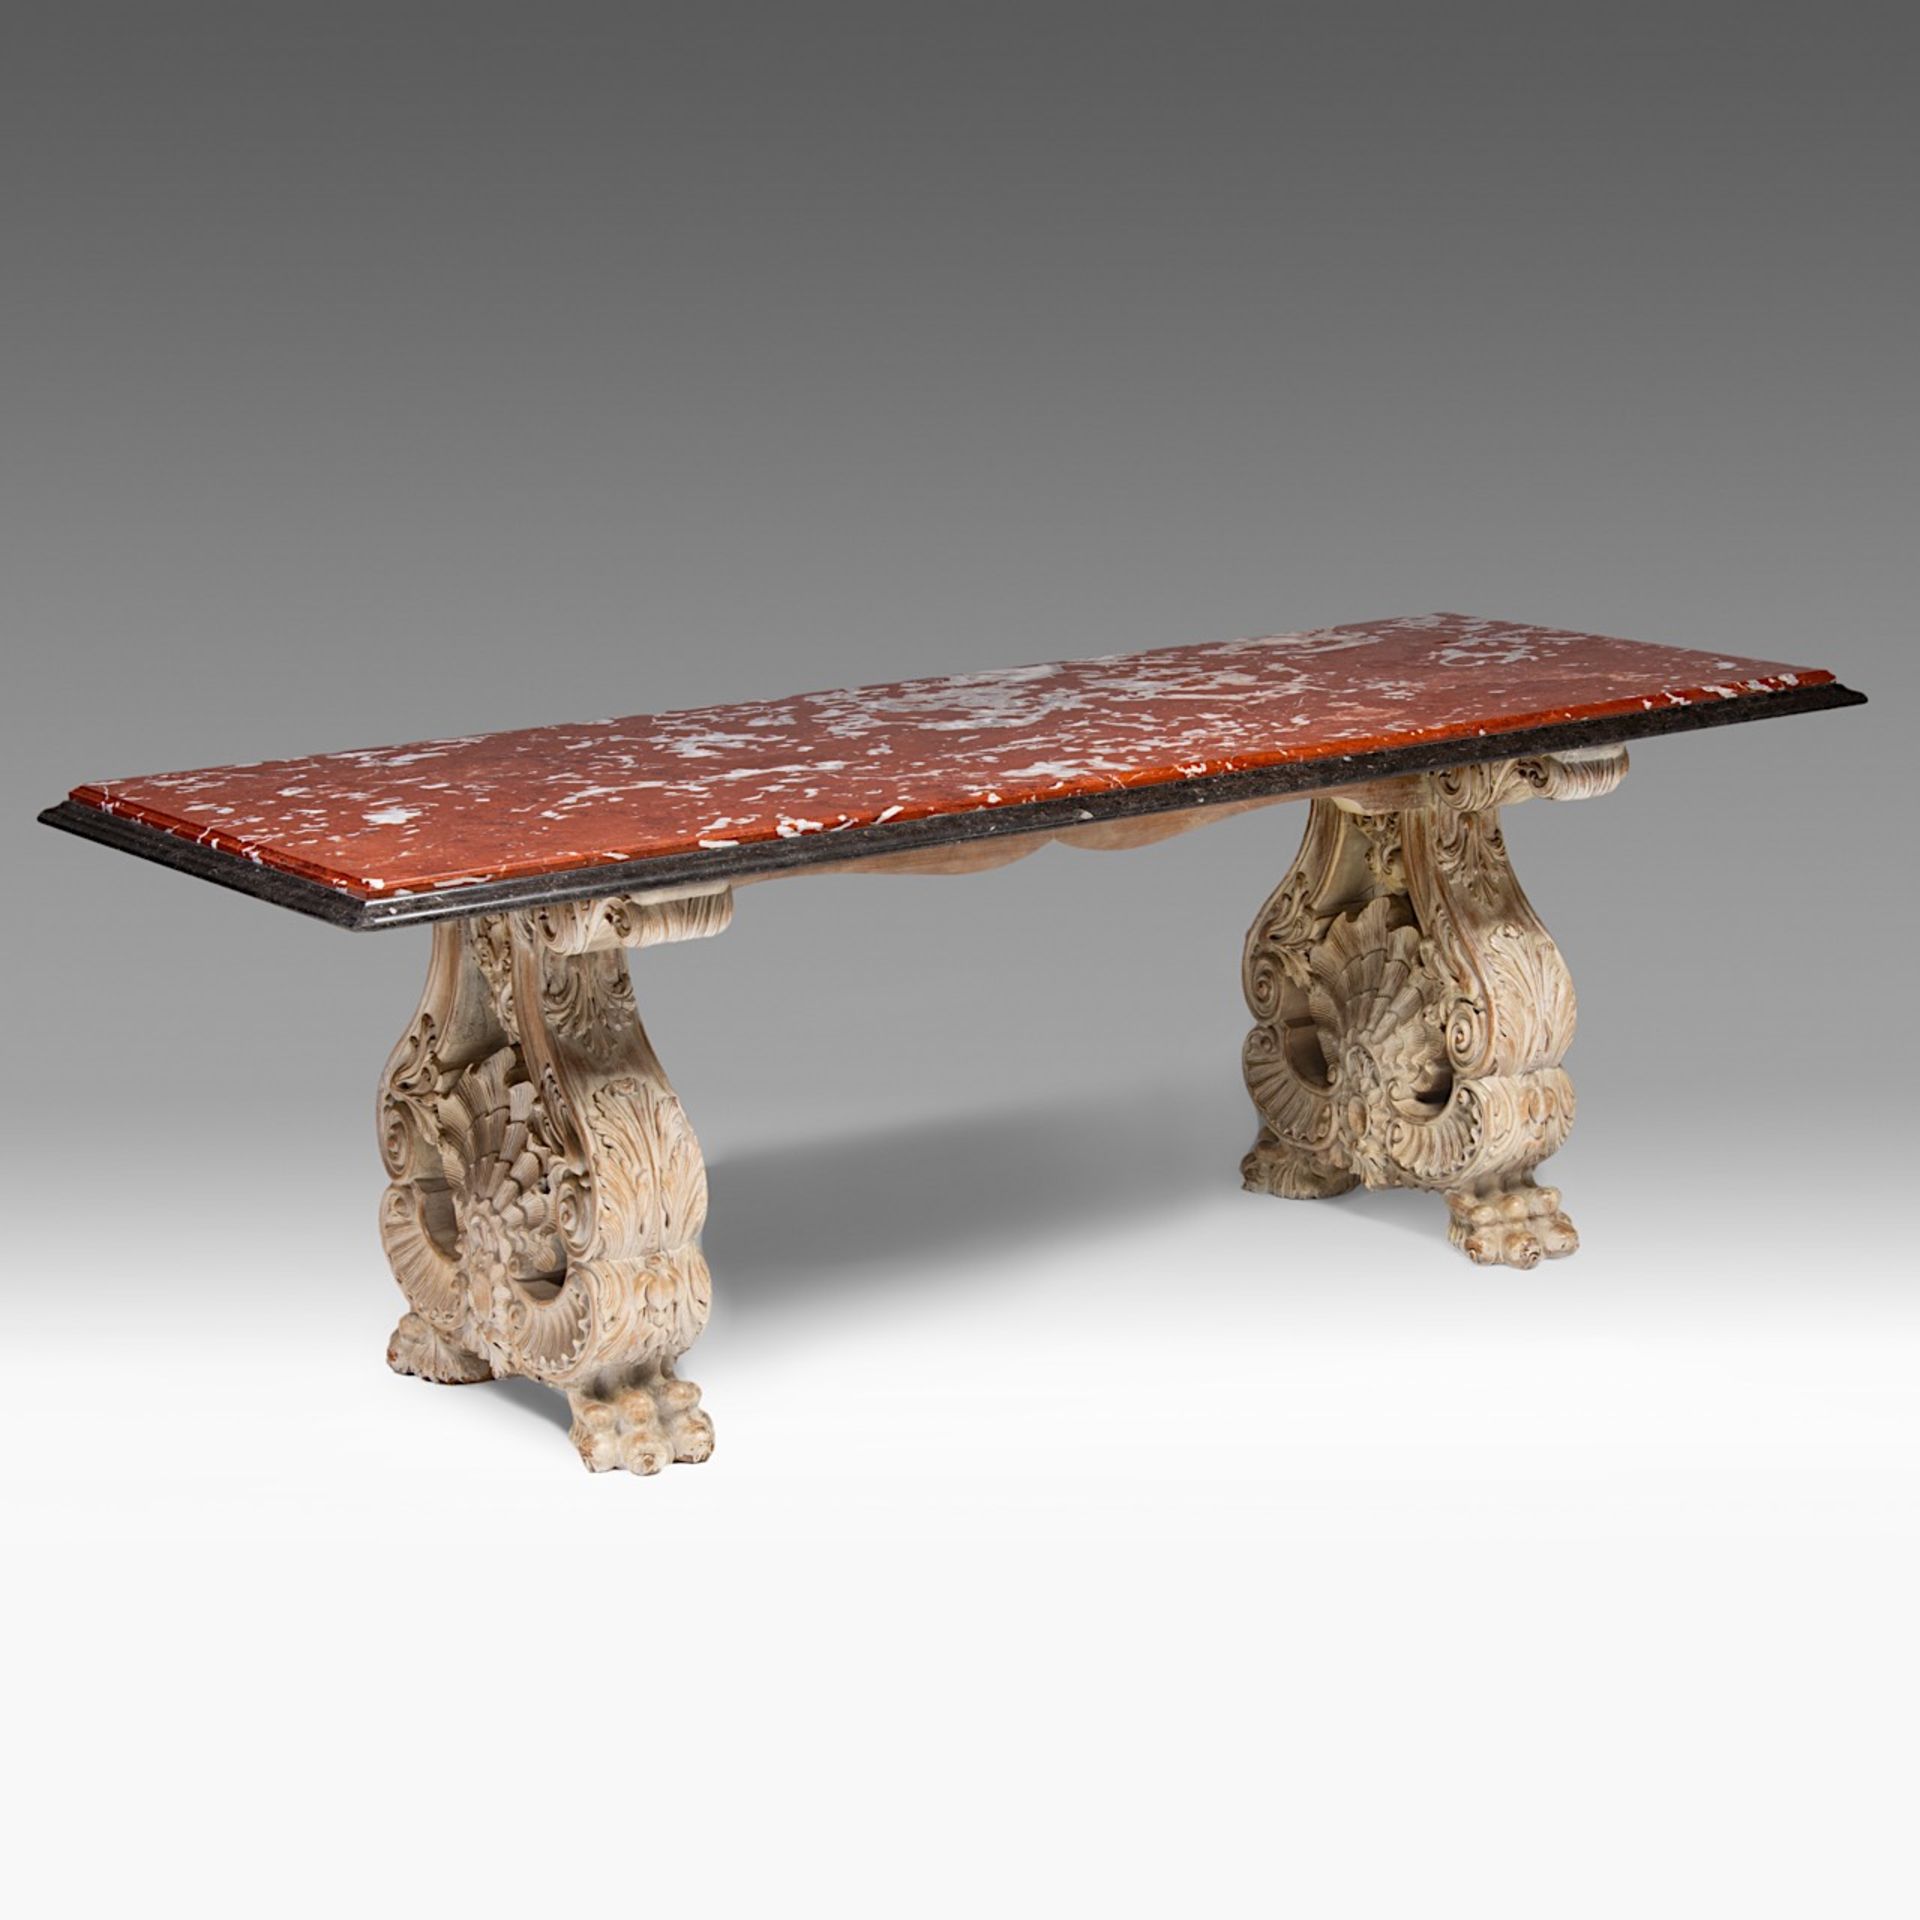 A Renaissance-style marble-topped table with sculpted wood trestles, H 76 cm - W 219 cm - D 84 cm - Image 3 of 6